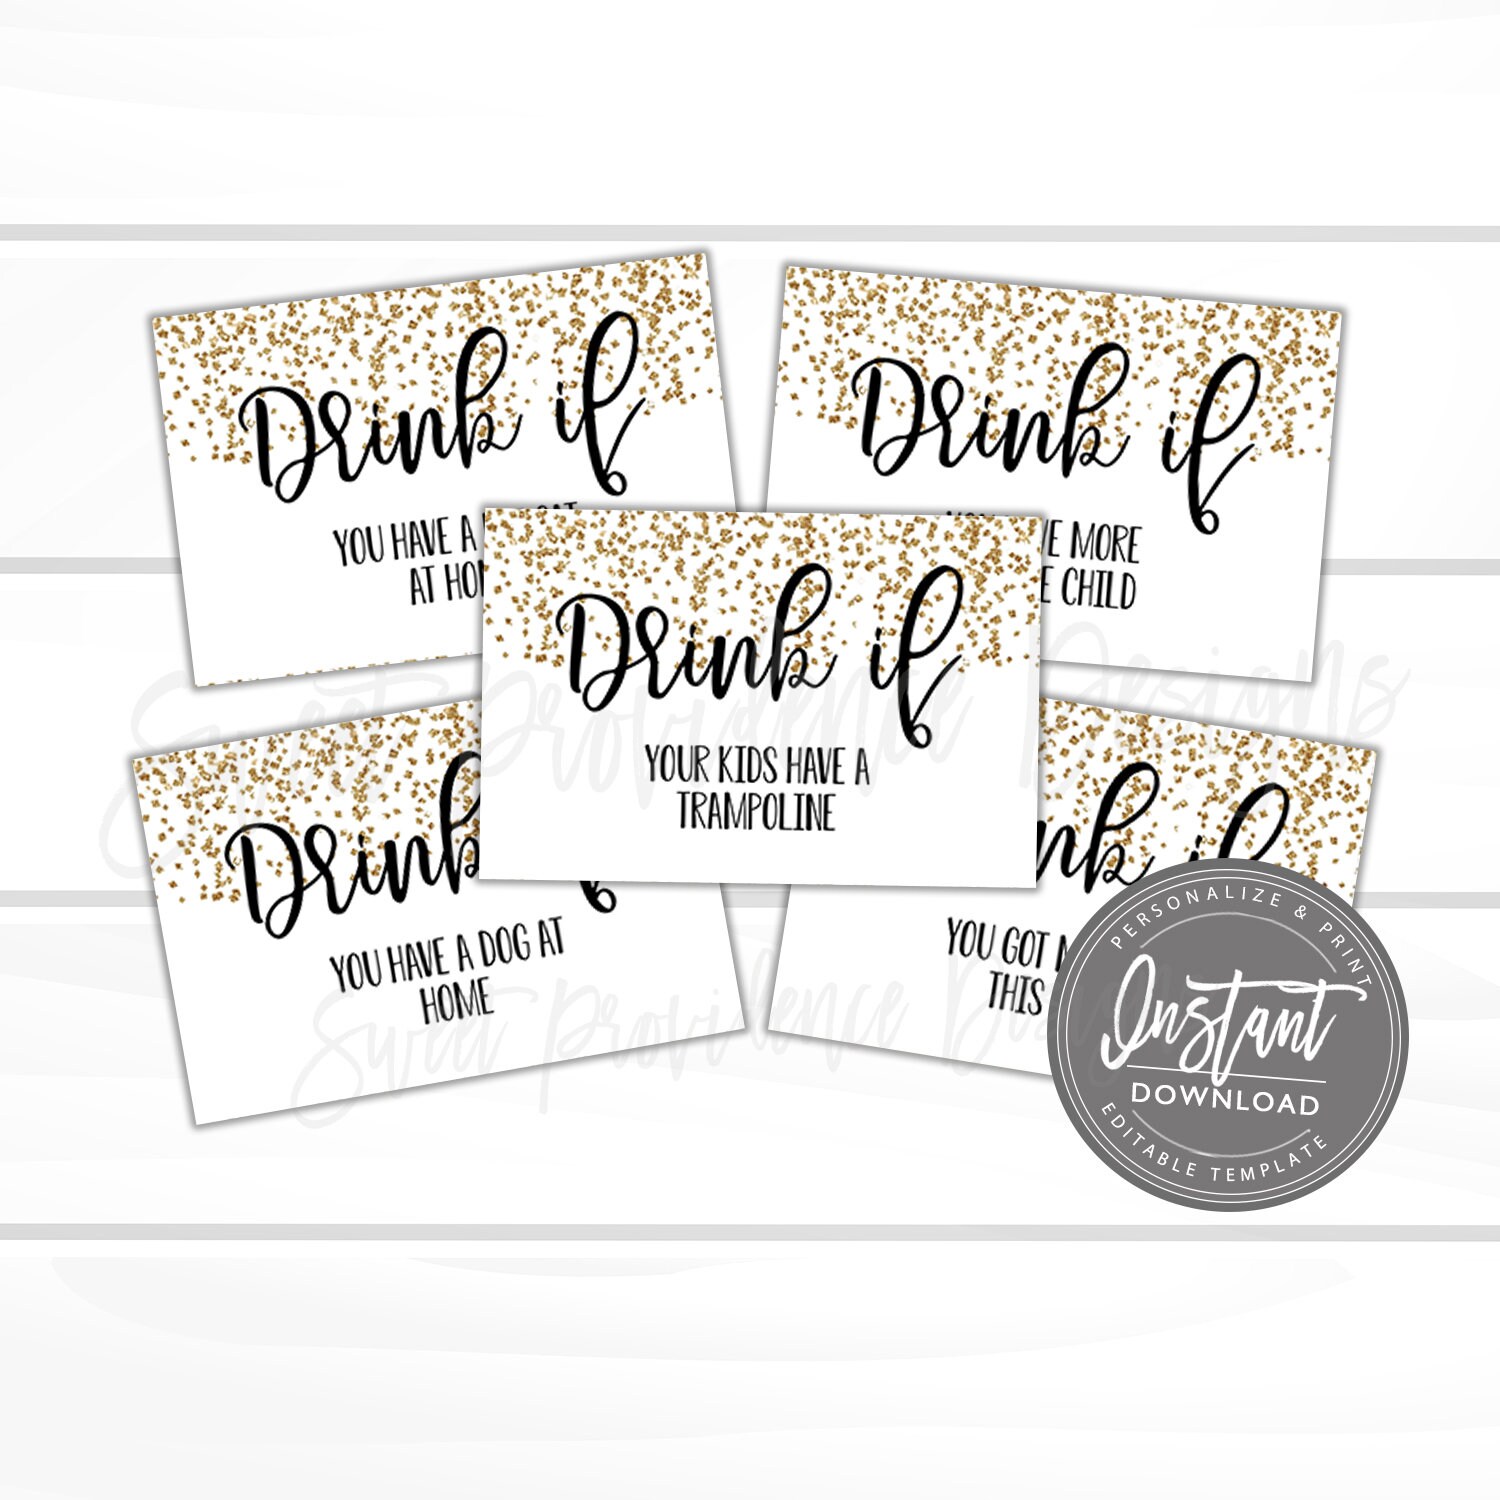 Drinking Game for Adults Printable Drink If Party Game Great 